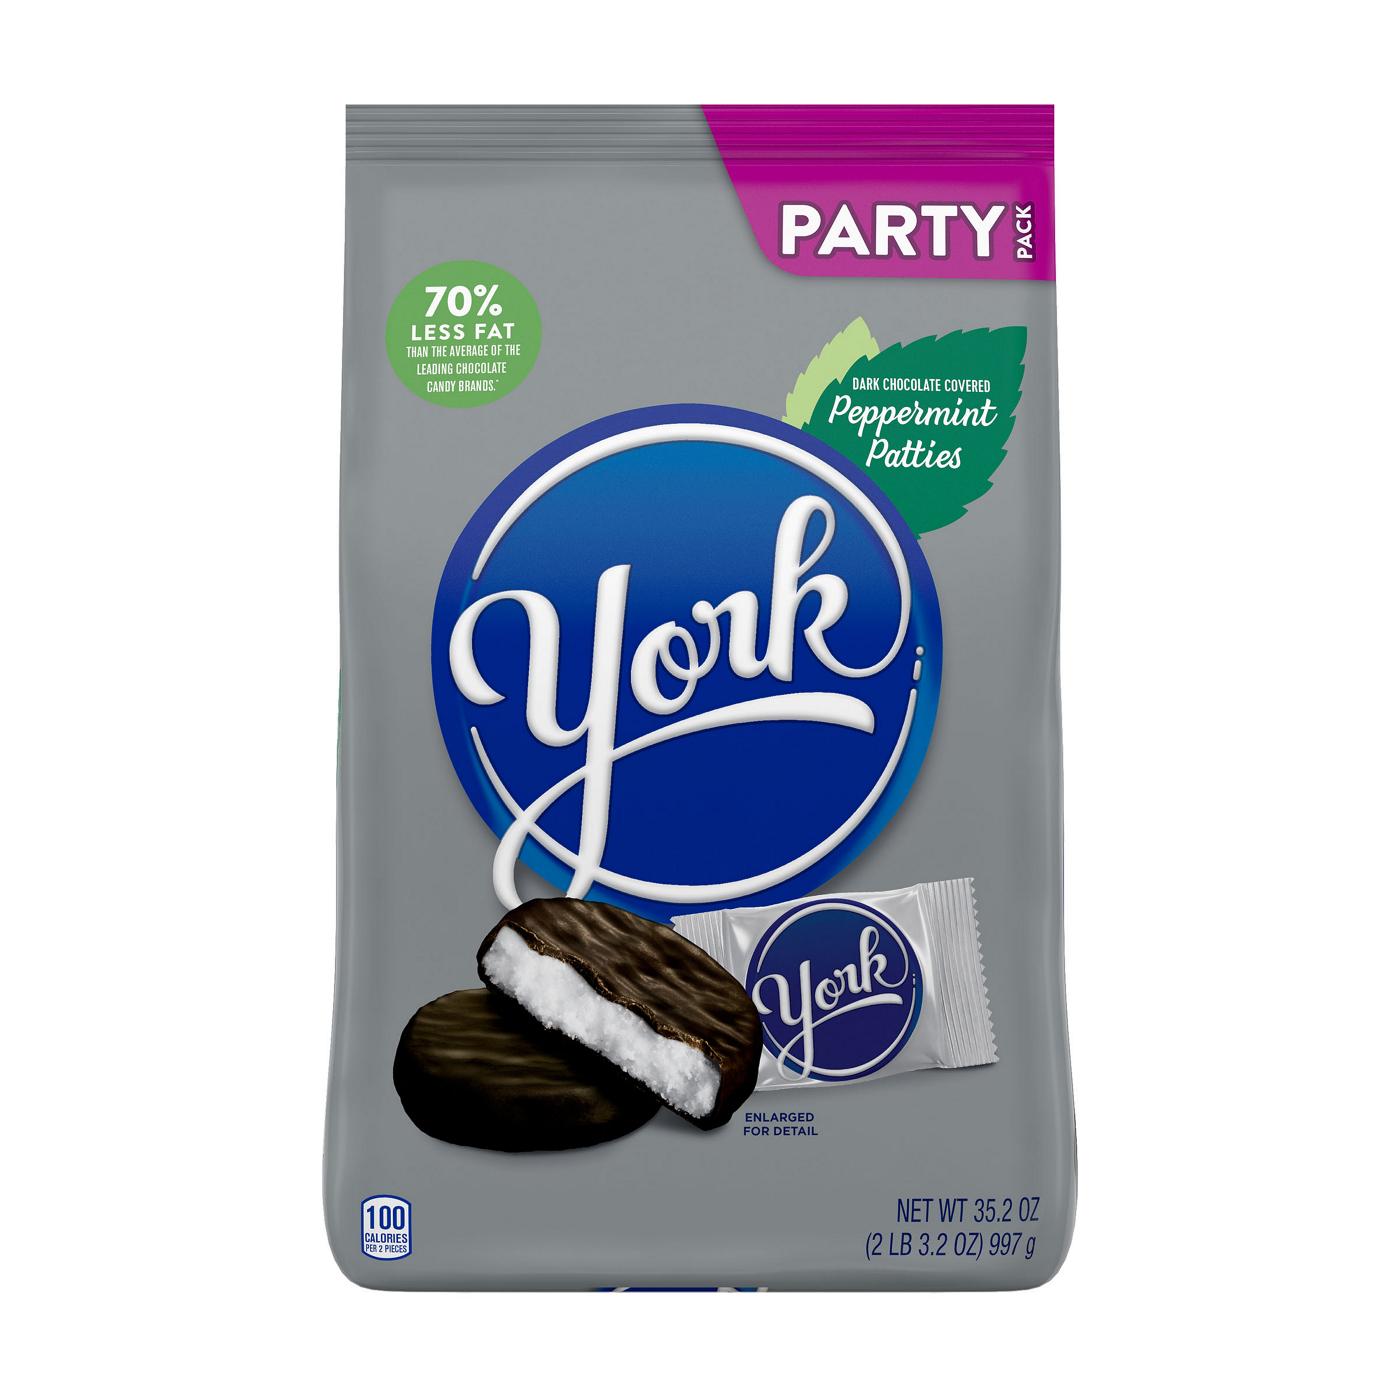 York Dark Chocolate Peppermint Patties Candy - Party Pack; image 1 of 7